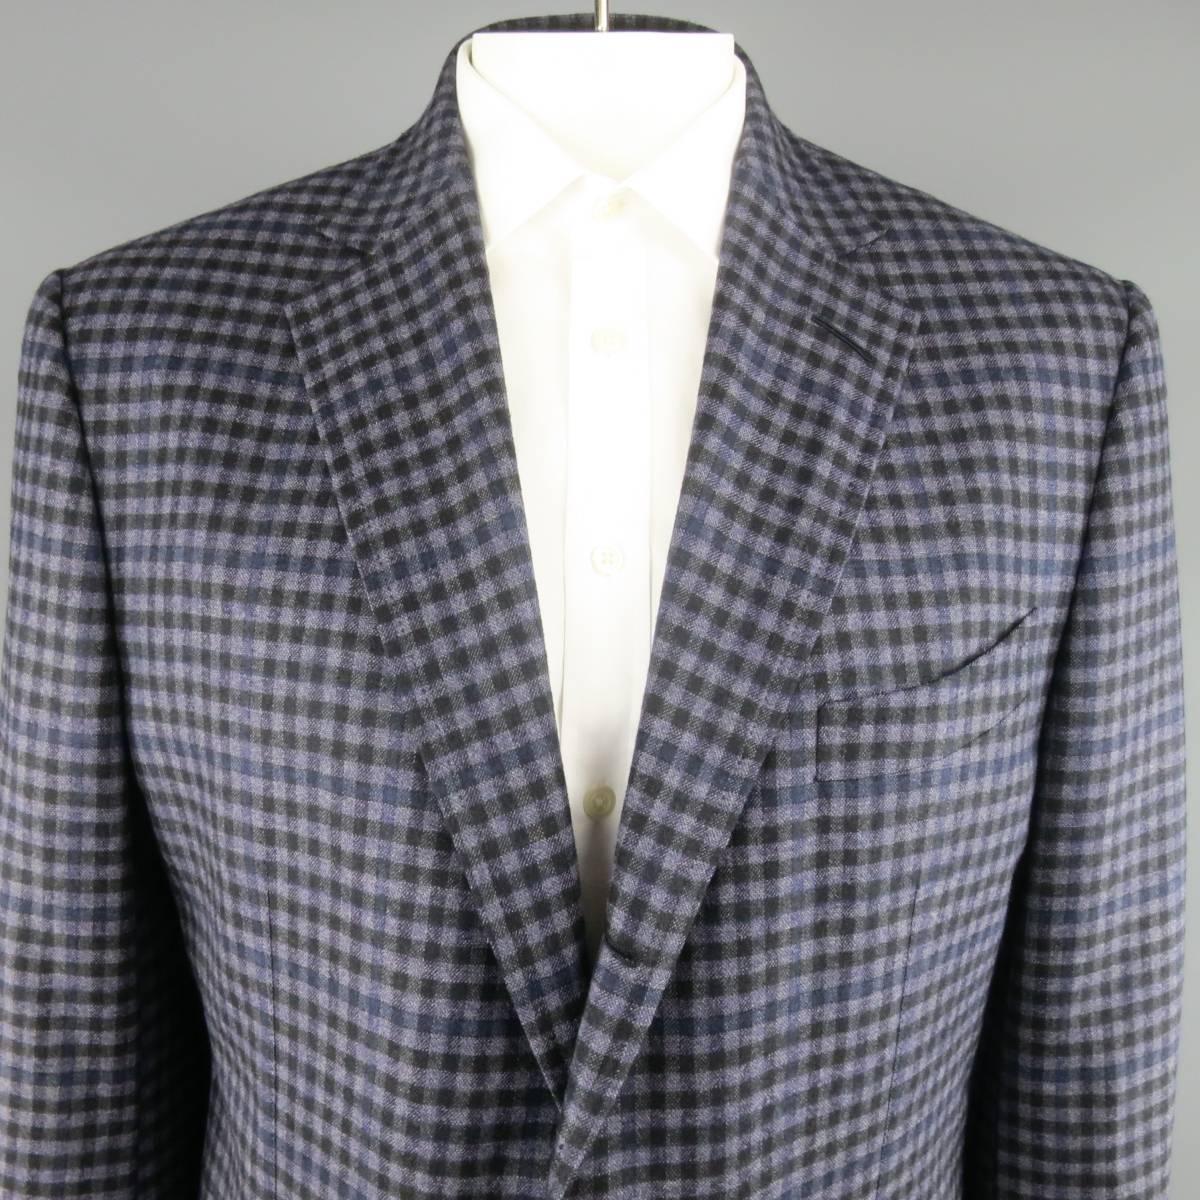 This TOM FORD three button sport coat comes in a muted lavender purple wool with an all over navy blue and black checkered plaid pattern and features a classic notch lapel, patch pockets, functional button cuffs, and half lining. Made in